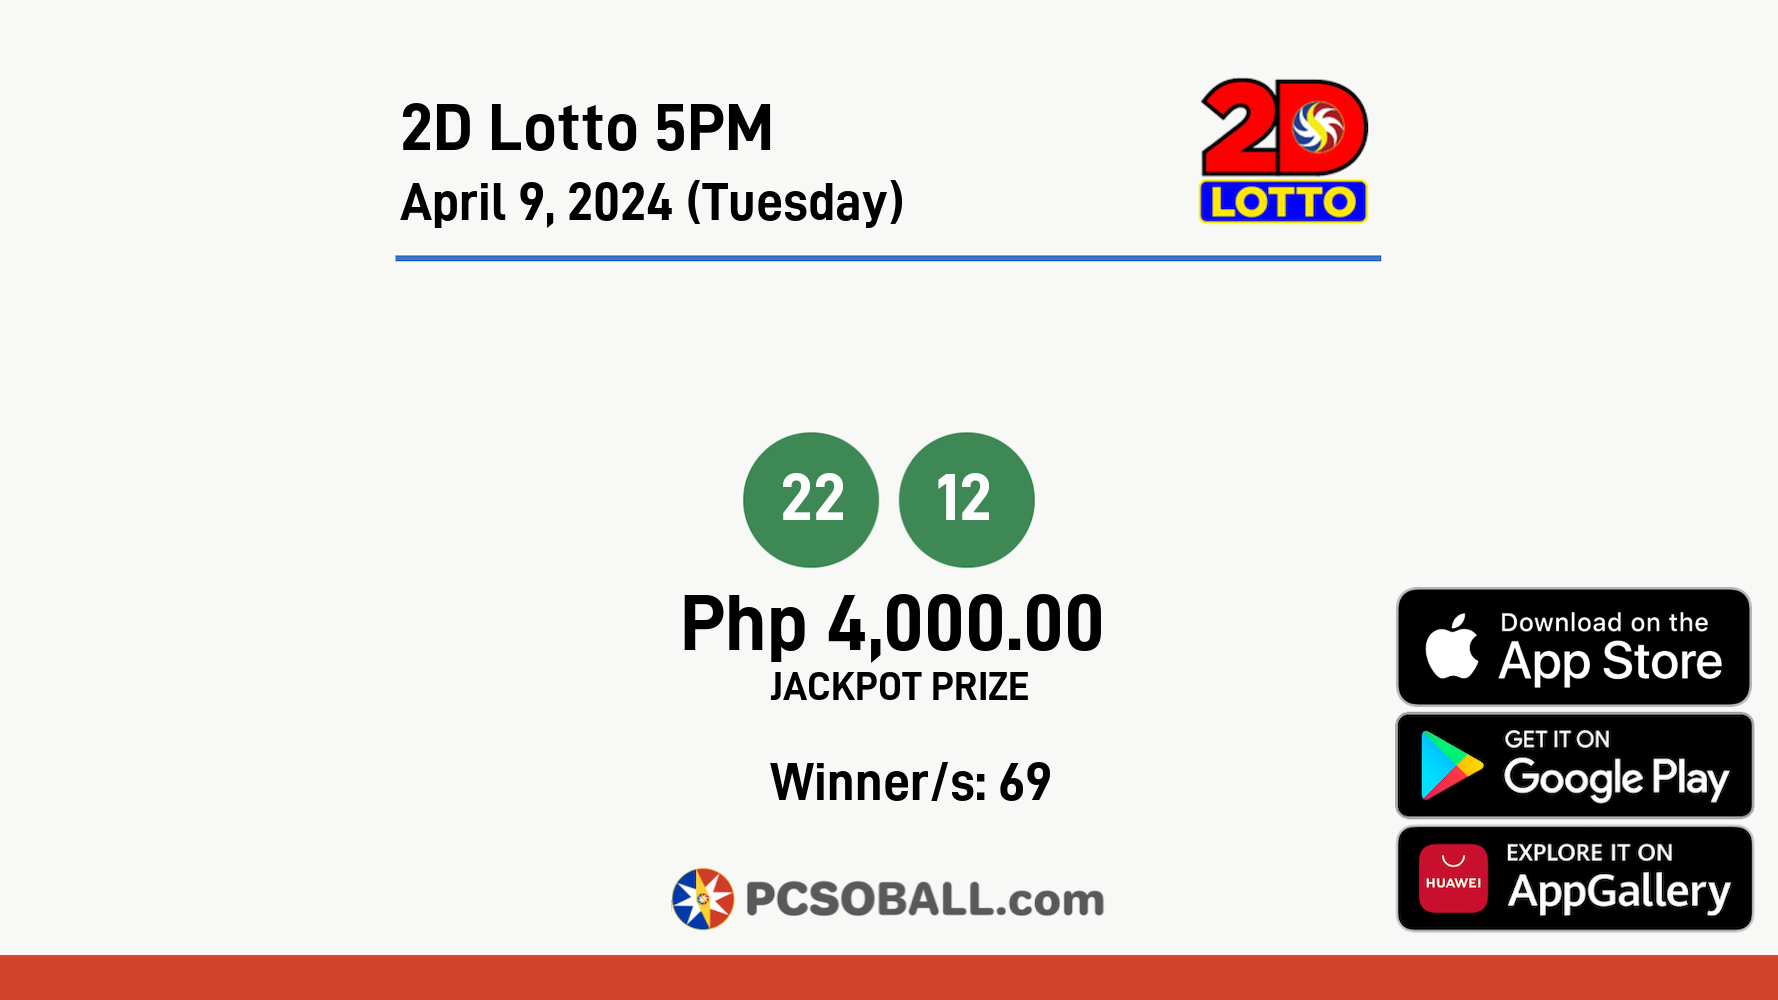 2D Lotto 5PM April 9, 2024 (Tuesday) Result